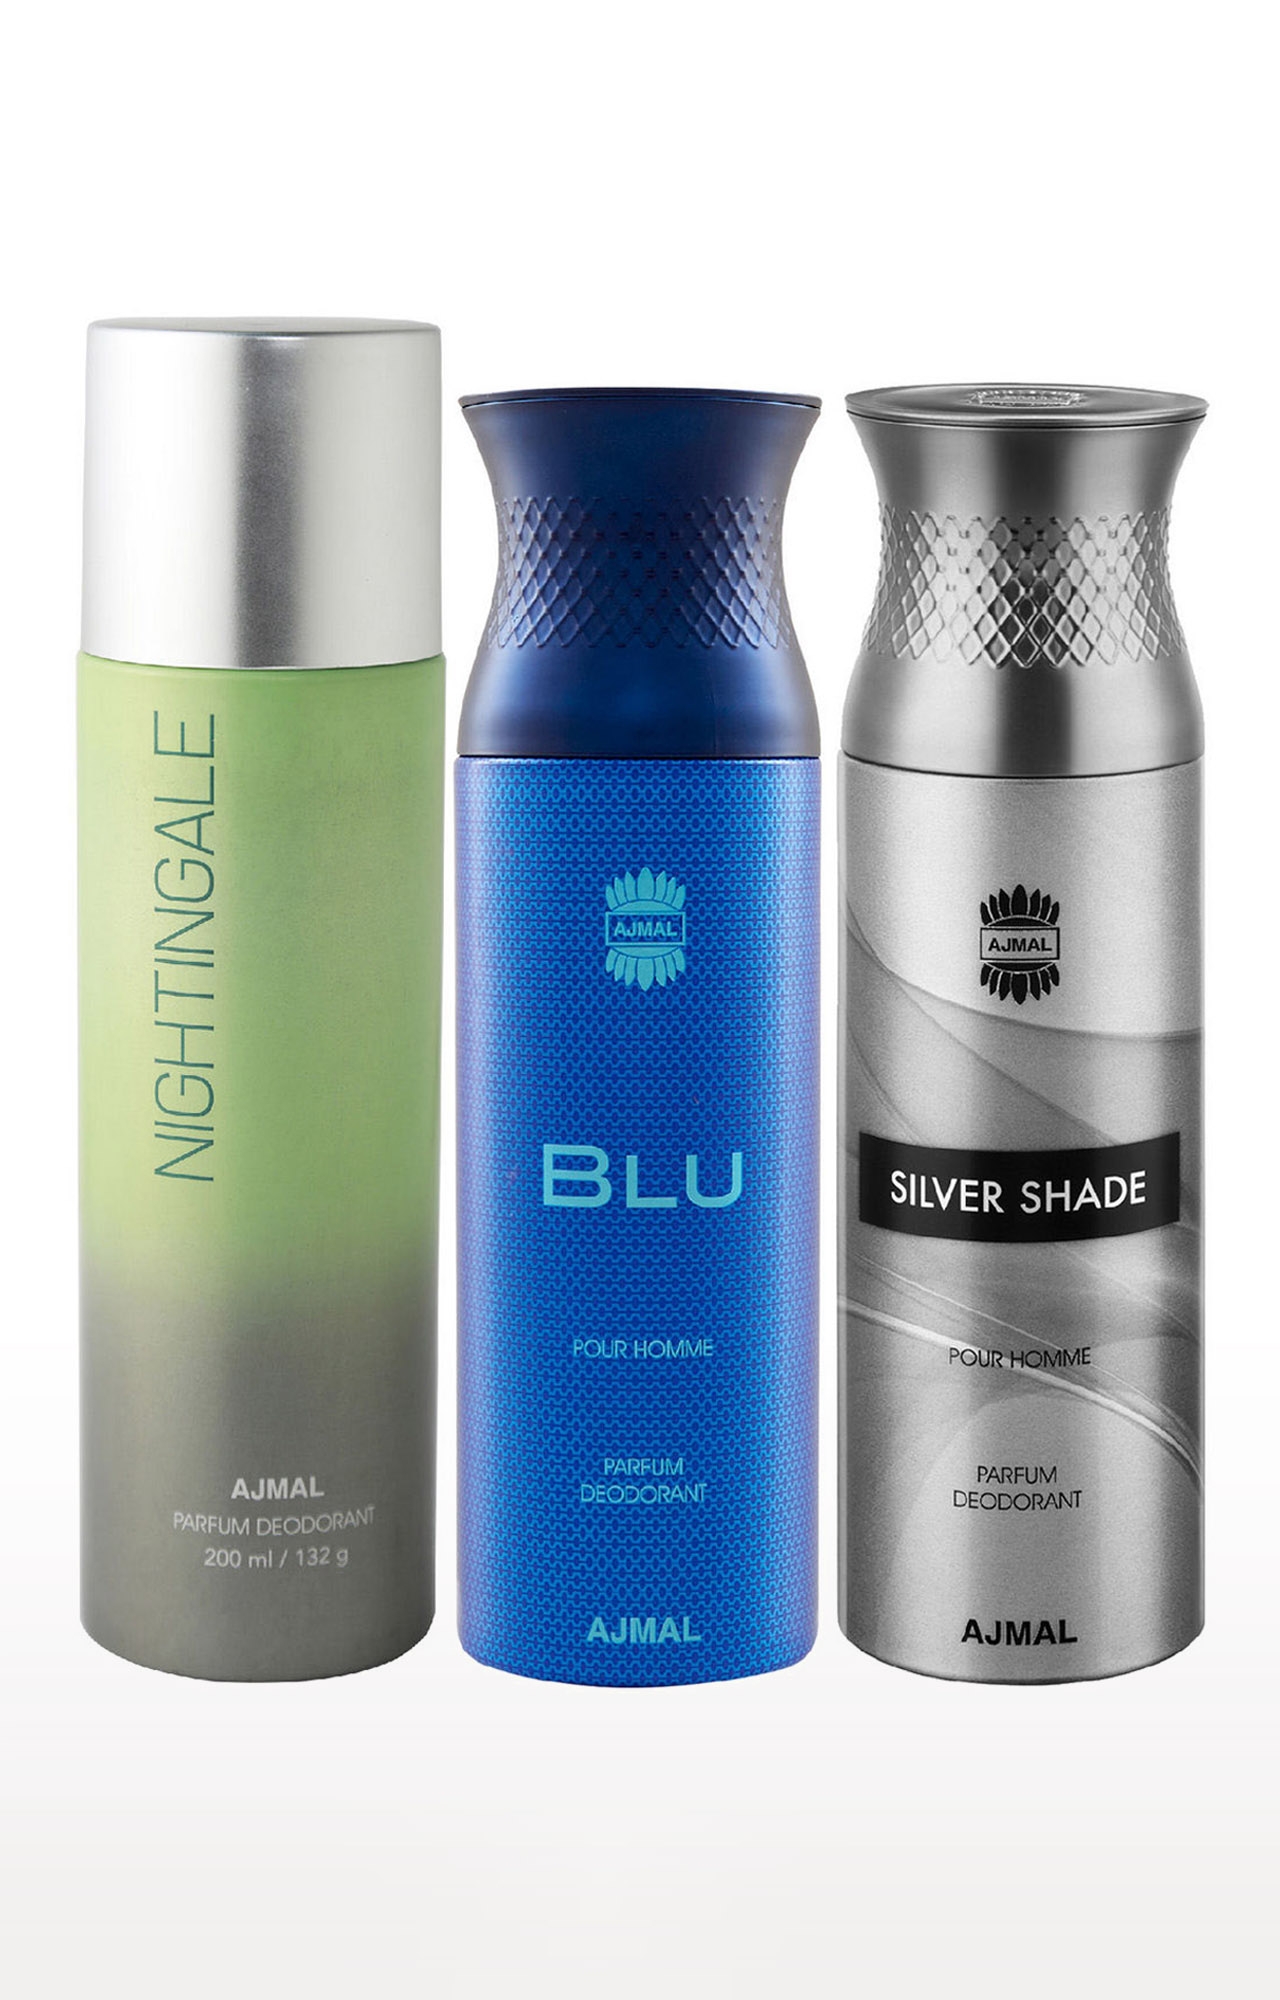 Ajmal | Ajmal 1 Nightingale for Men & Women, 1 Blu Homme for Men and 1 Silver Shade for Men High Quality Deodorants each 200ML Combo pack of 3 (Total 600ML) 